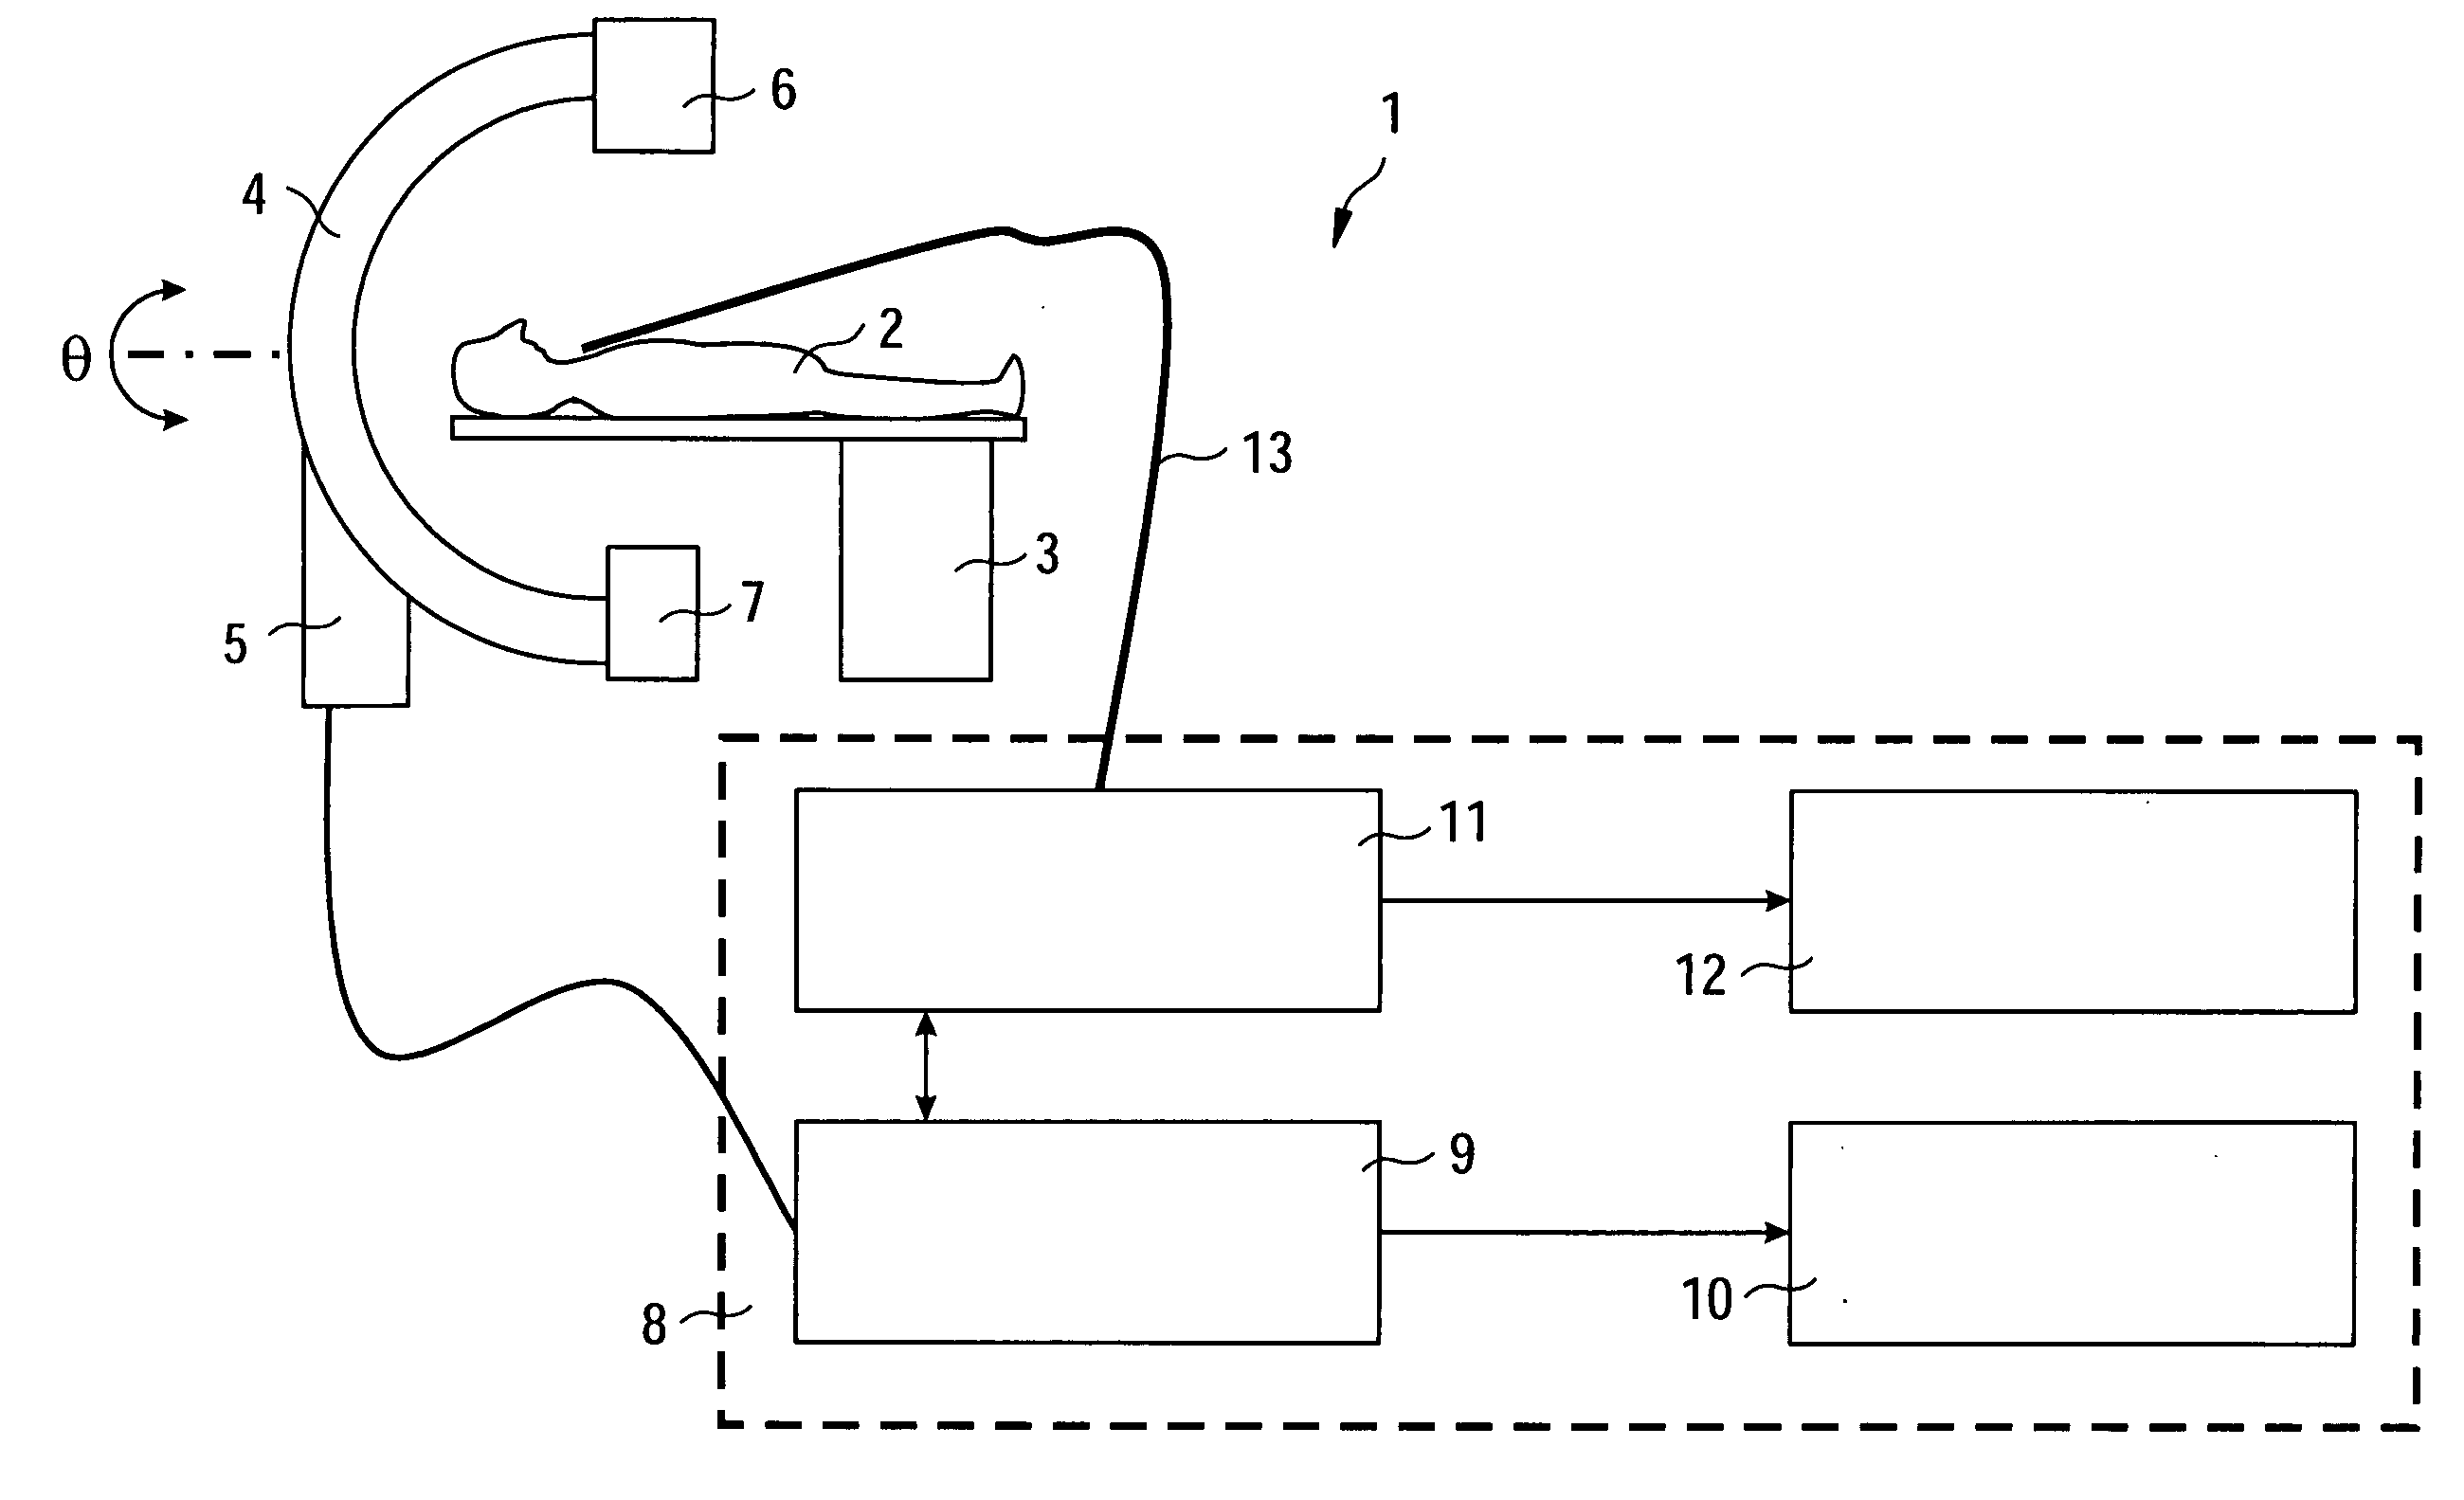 Device for obtaining structure data of a moving object